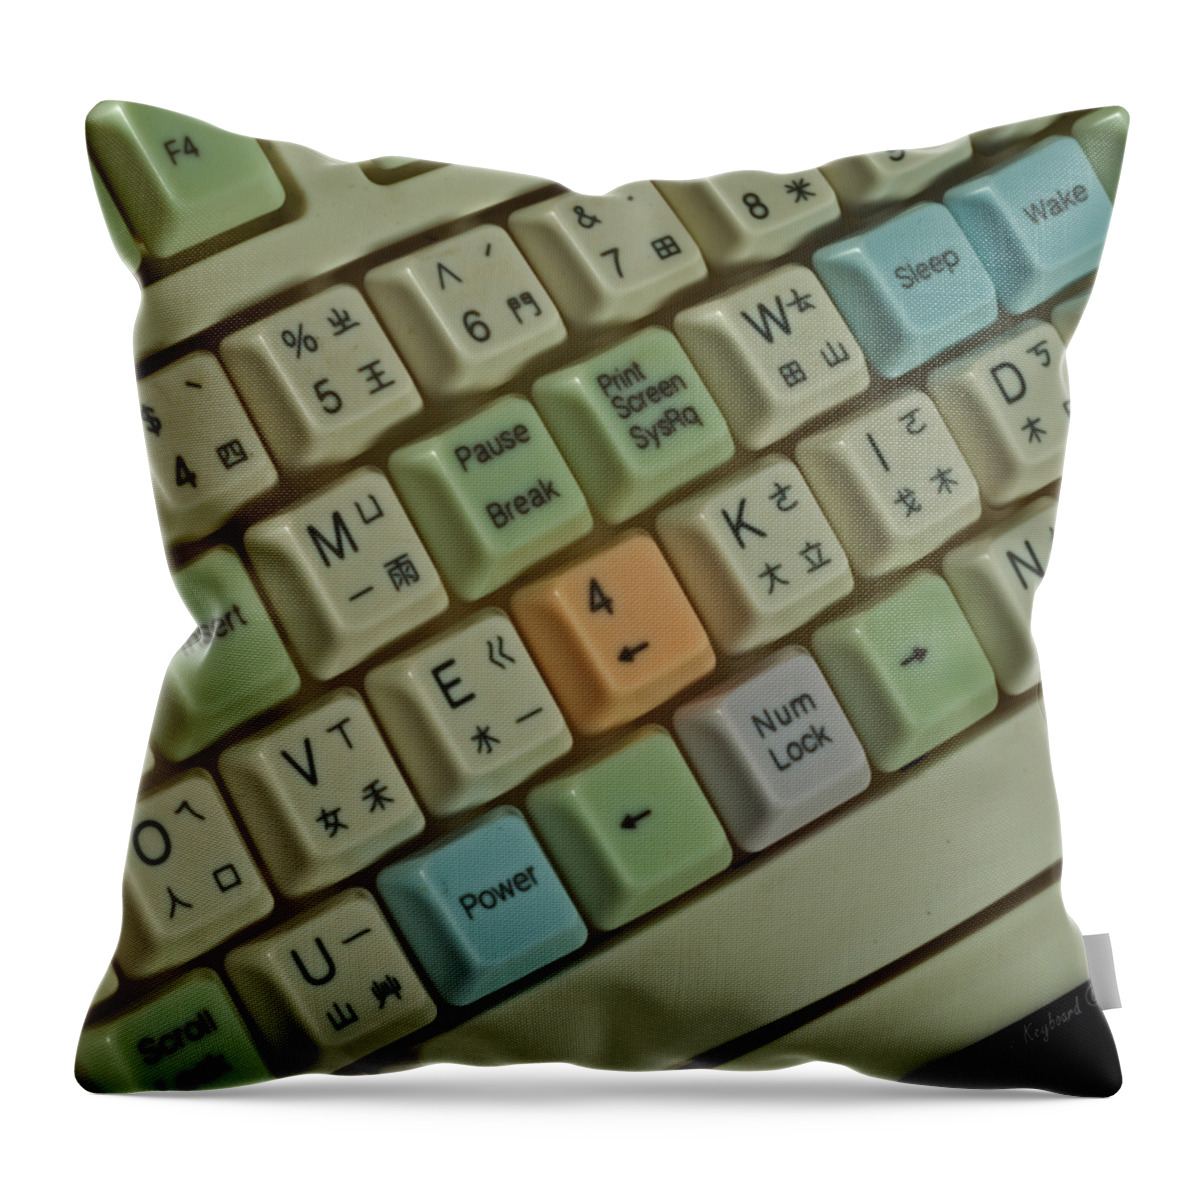 Love Throw Pillow featuring the photograph Love Puzzle Keyboard by Rolf Bertram